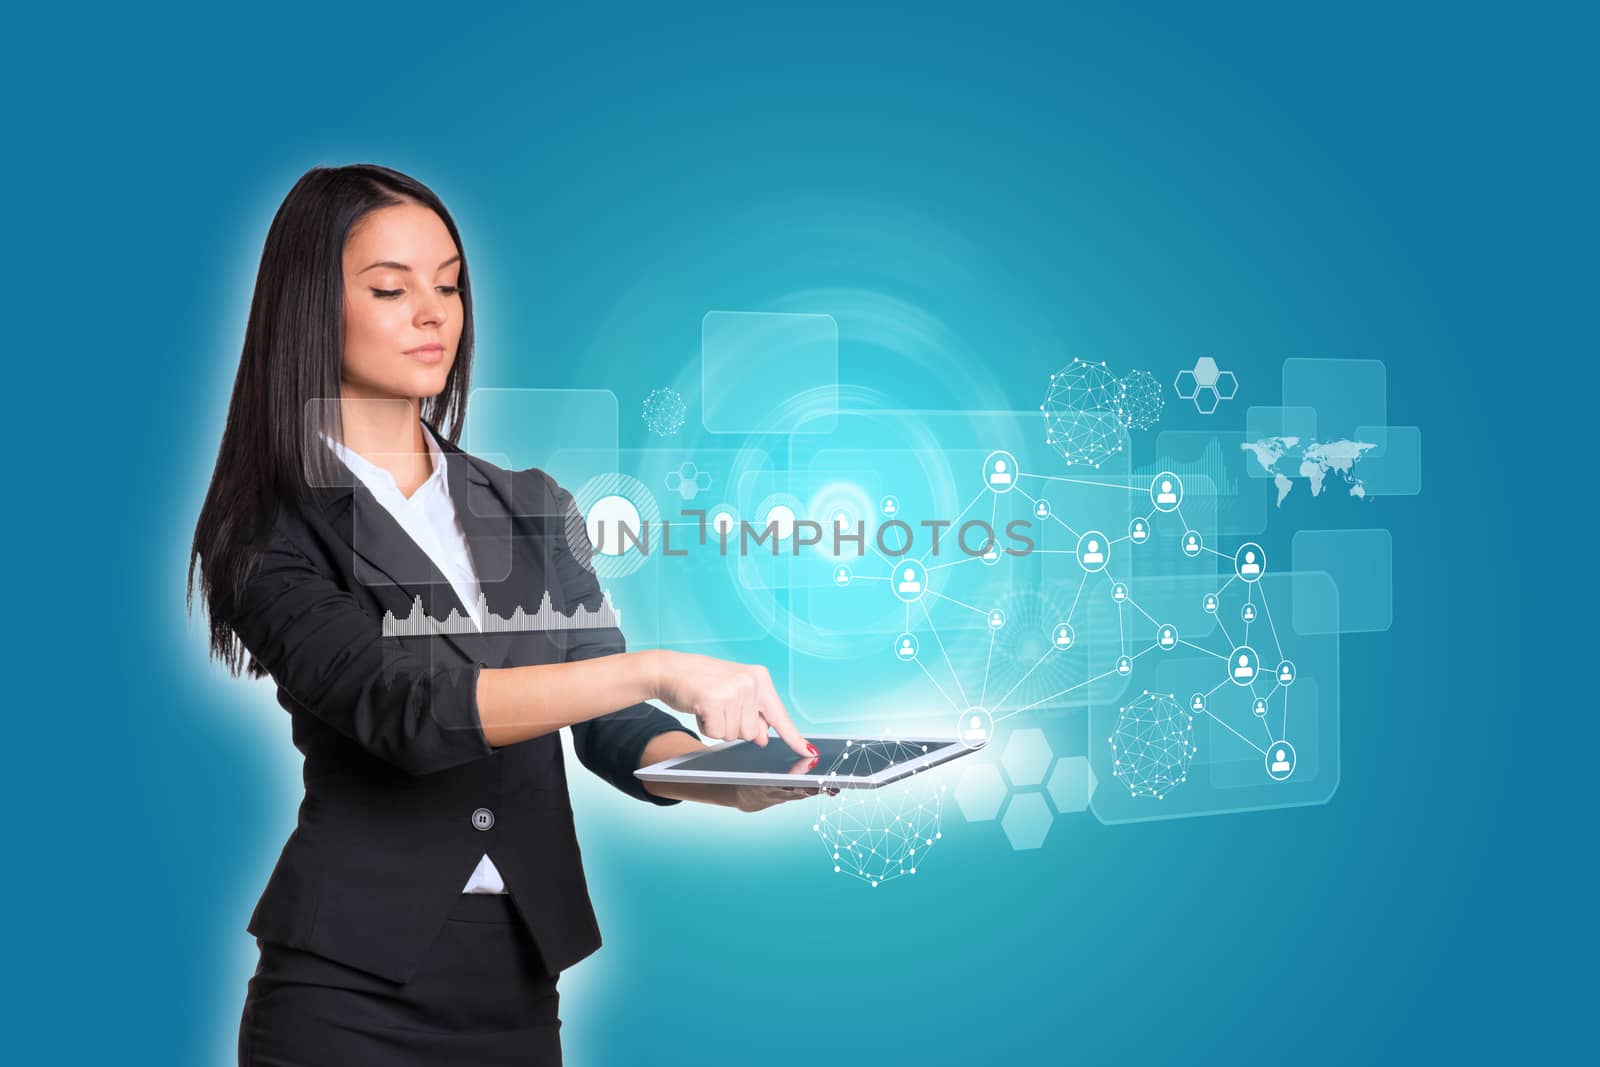 Beautiful businesswomen in suit using digital tablet. Glow circles, transparent rectangles, graphs and network